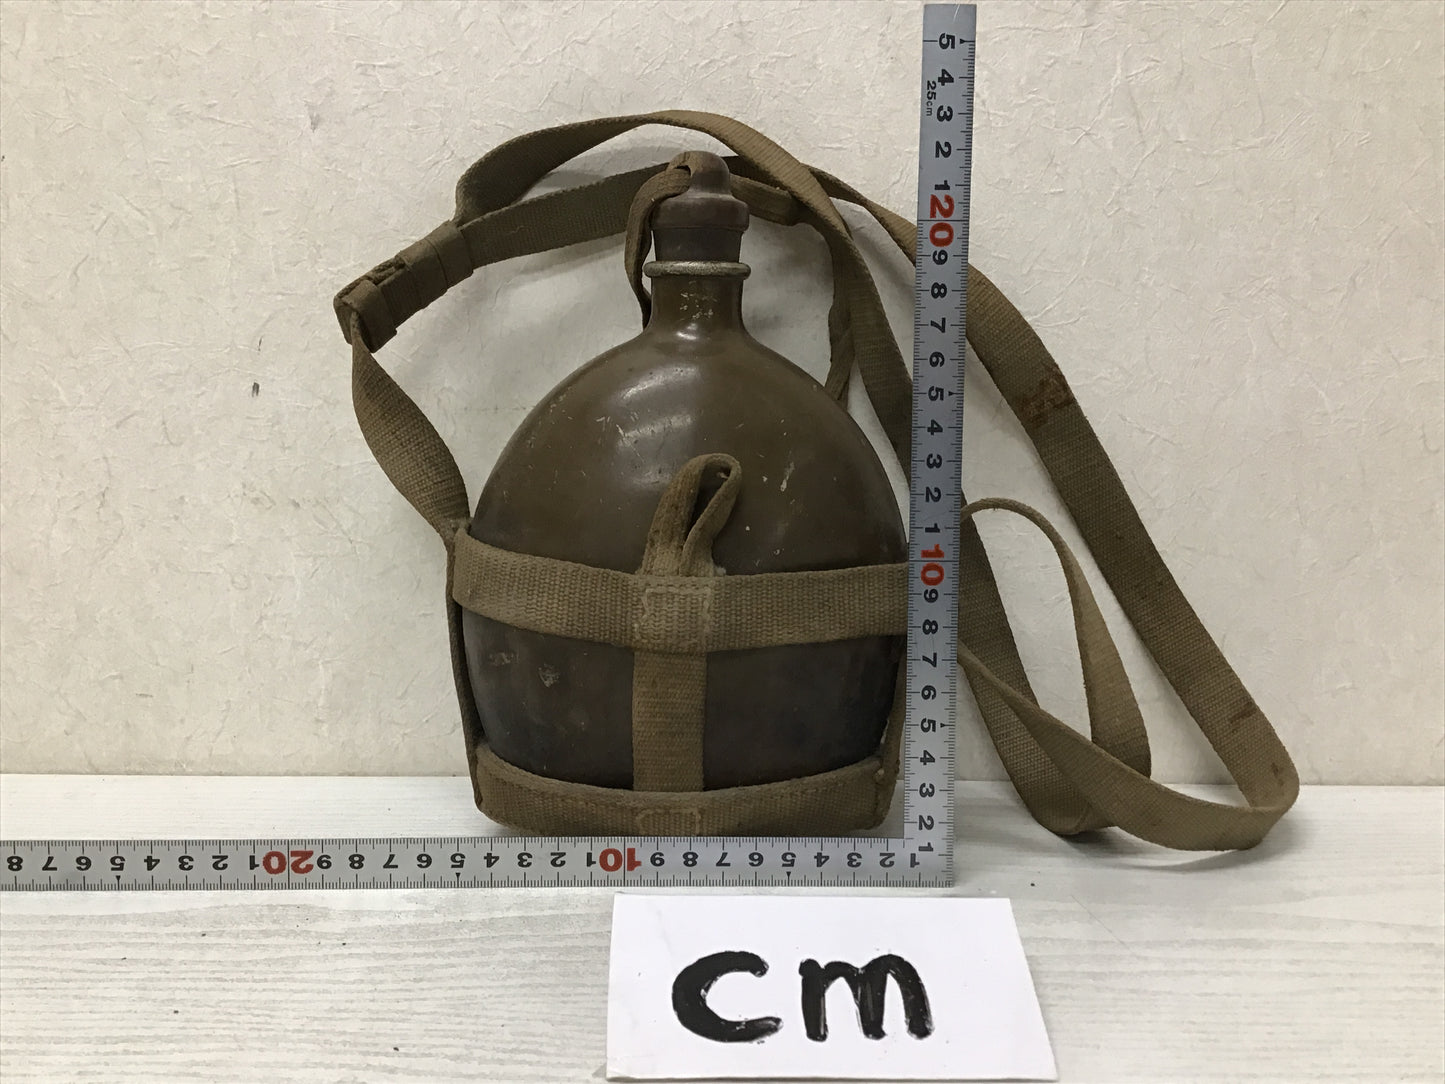 Y2372 Imperial Japan Army Canteen water bottle military gear Japan WW2 vintage